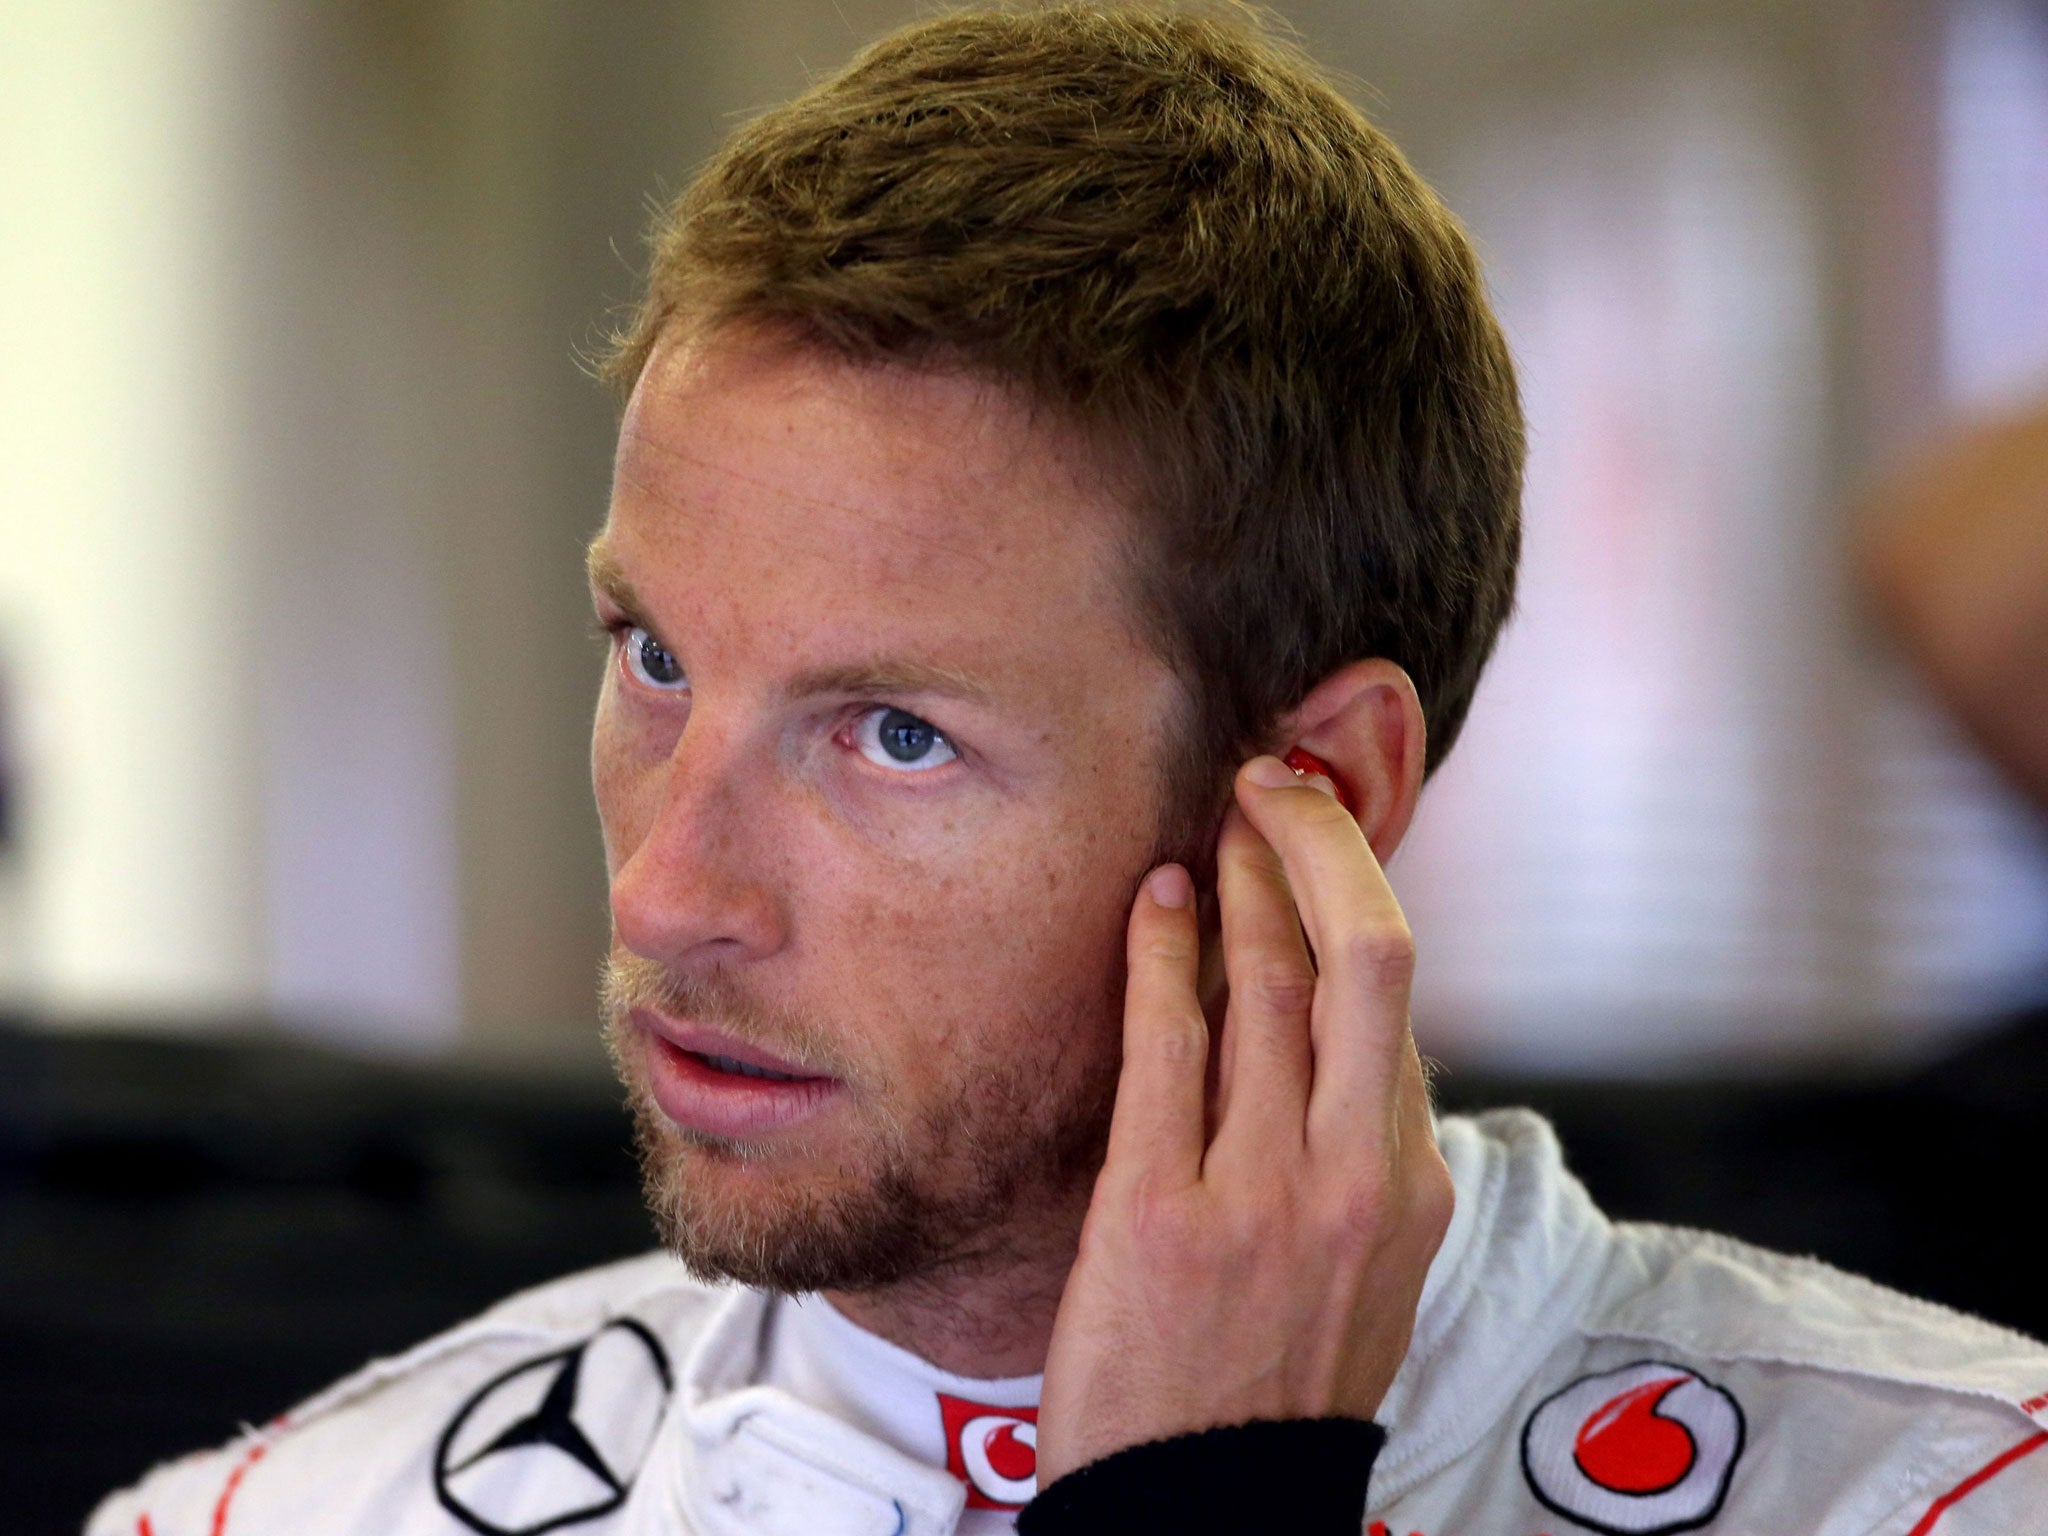 Jenson Button: The McLaren driver was praised for being a ‘great team player’ by his principal